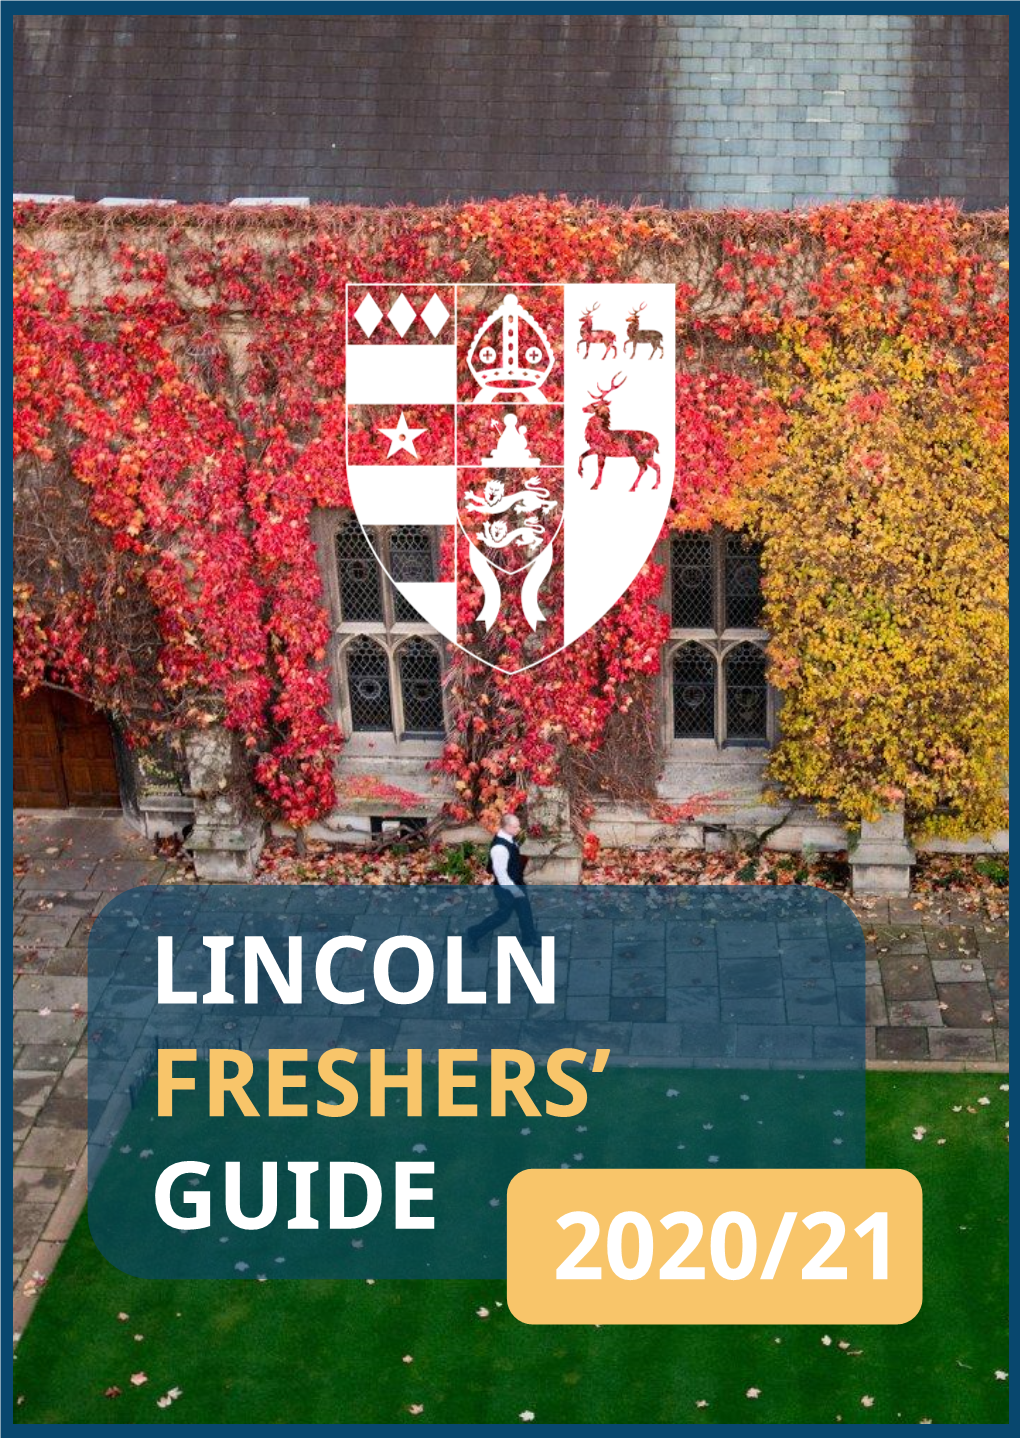 Lincoln Freshers' Guide 2020/21